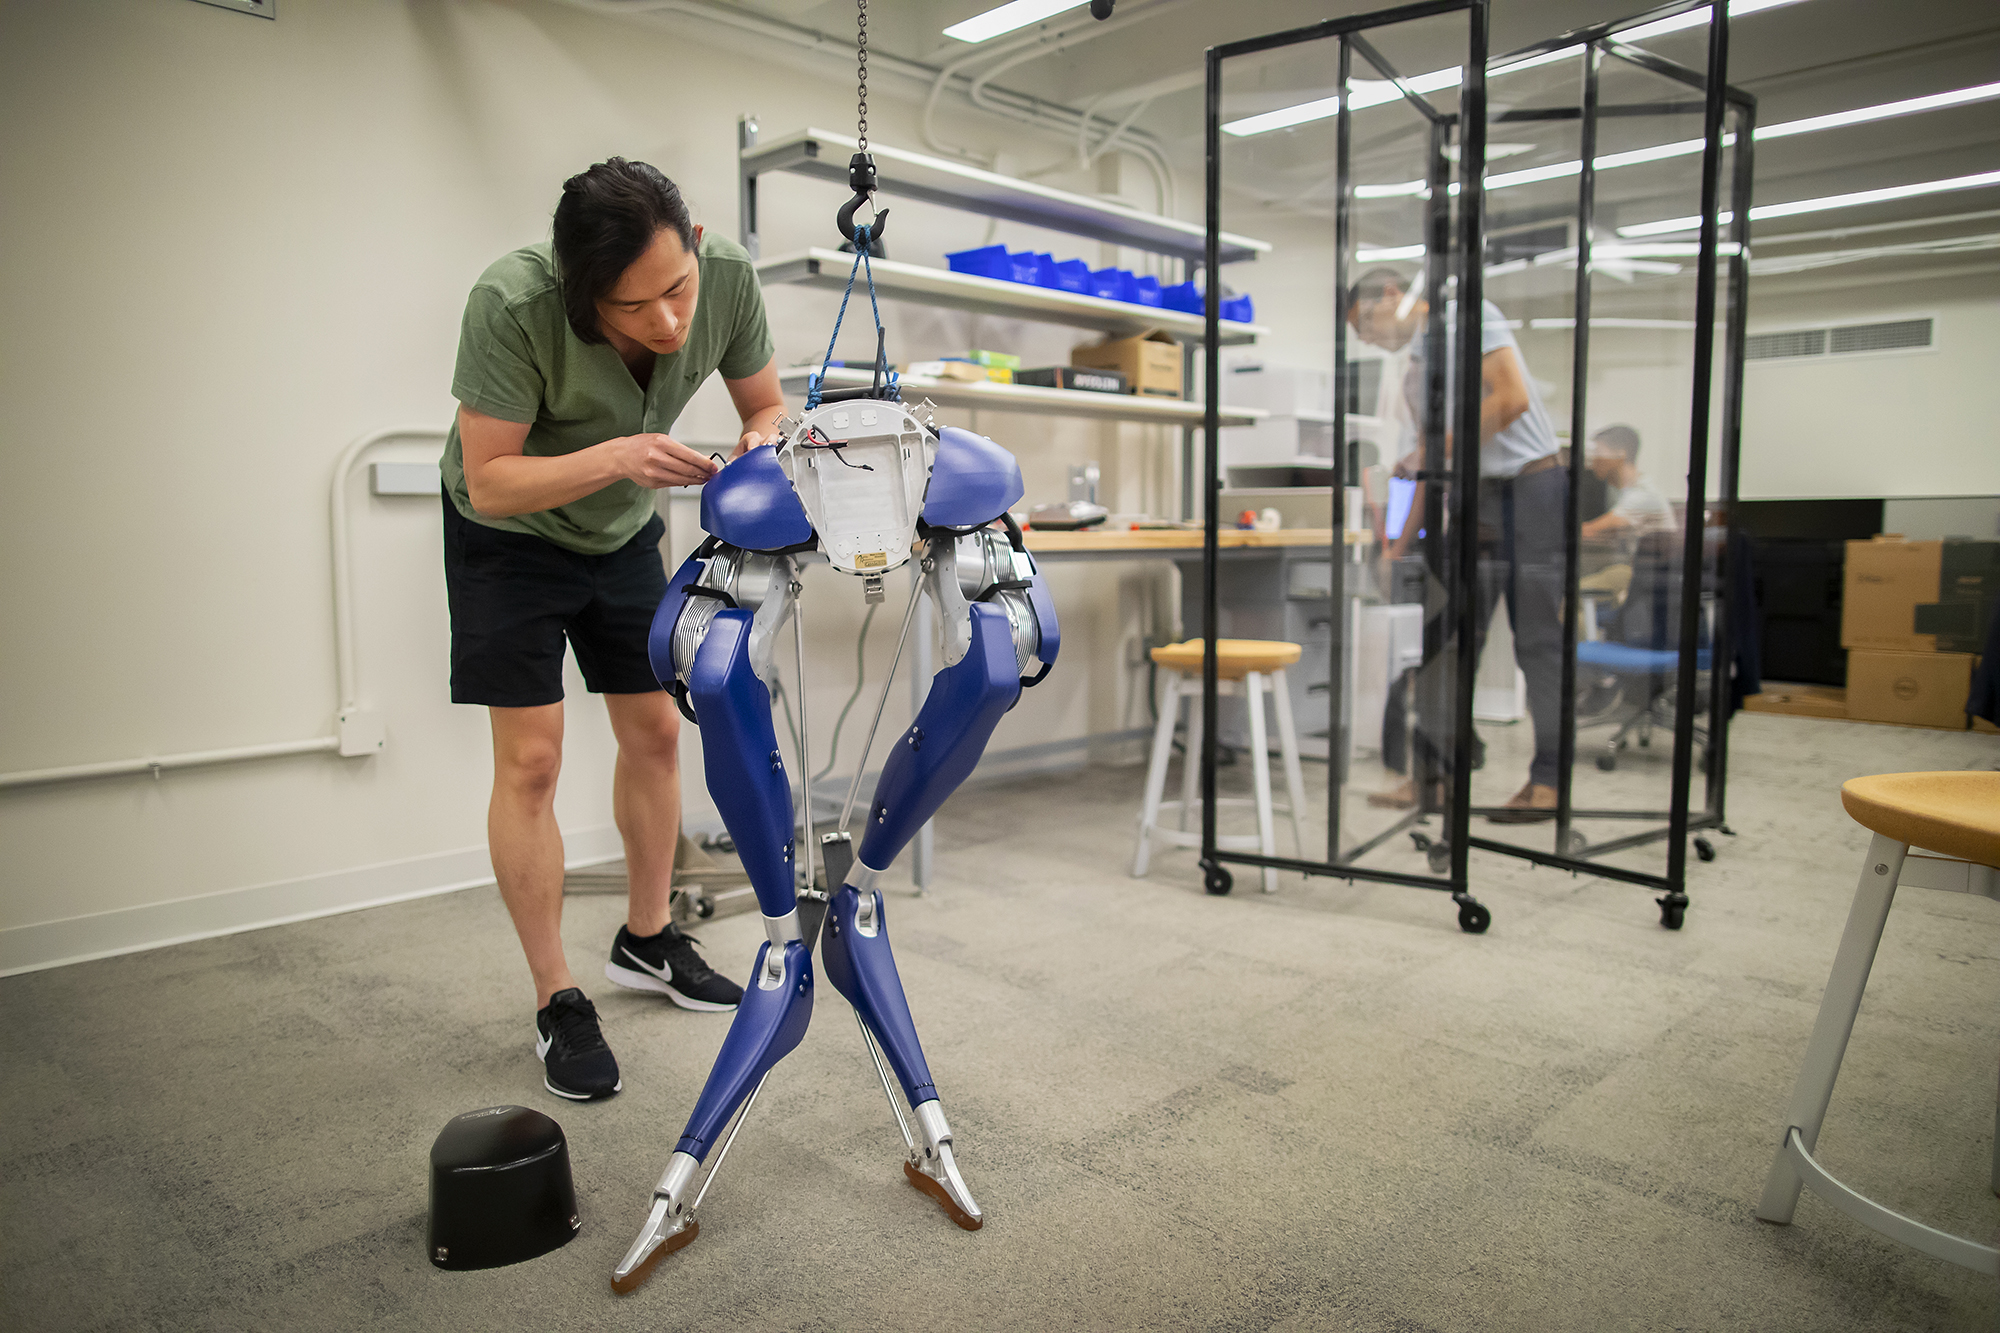 chen works on the robotic legs